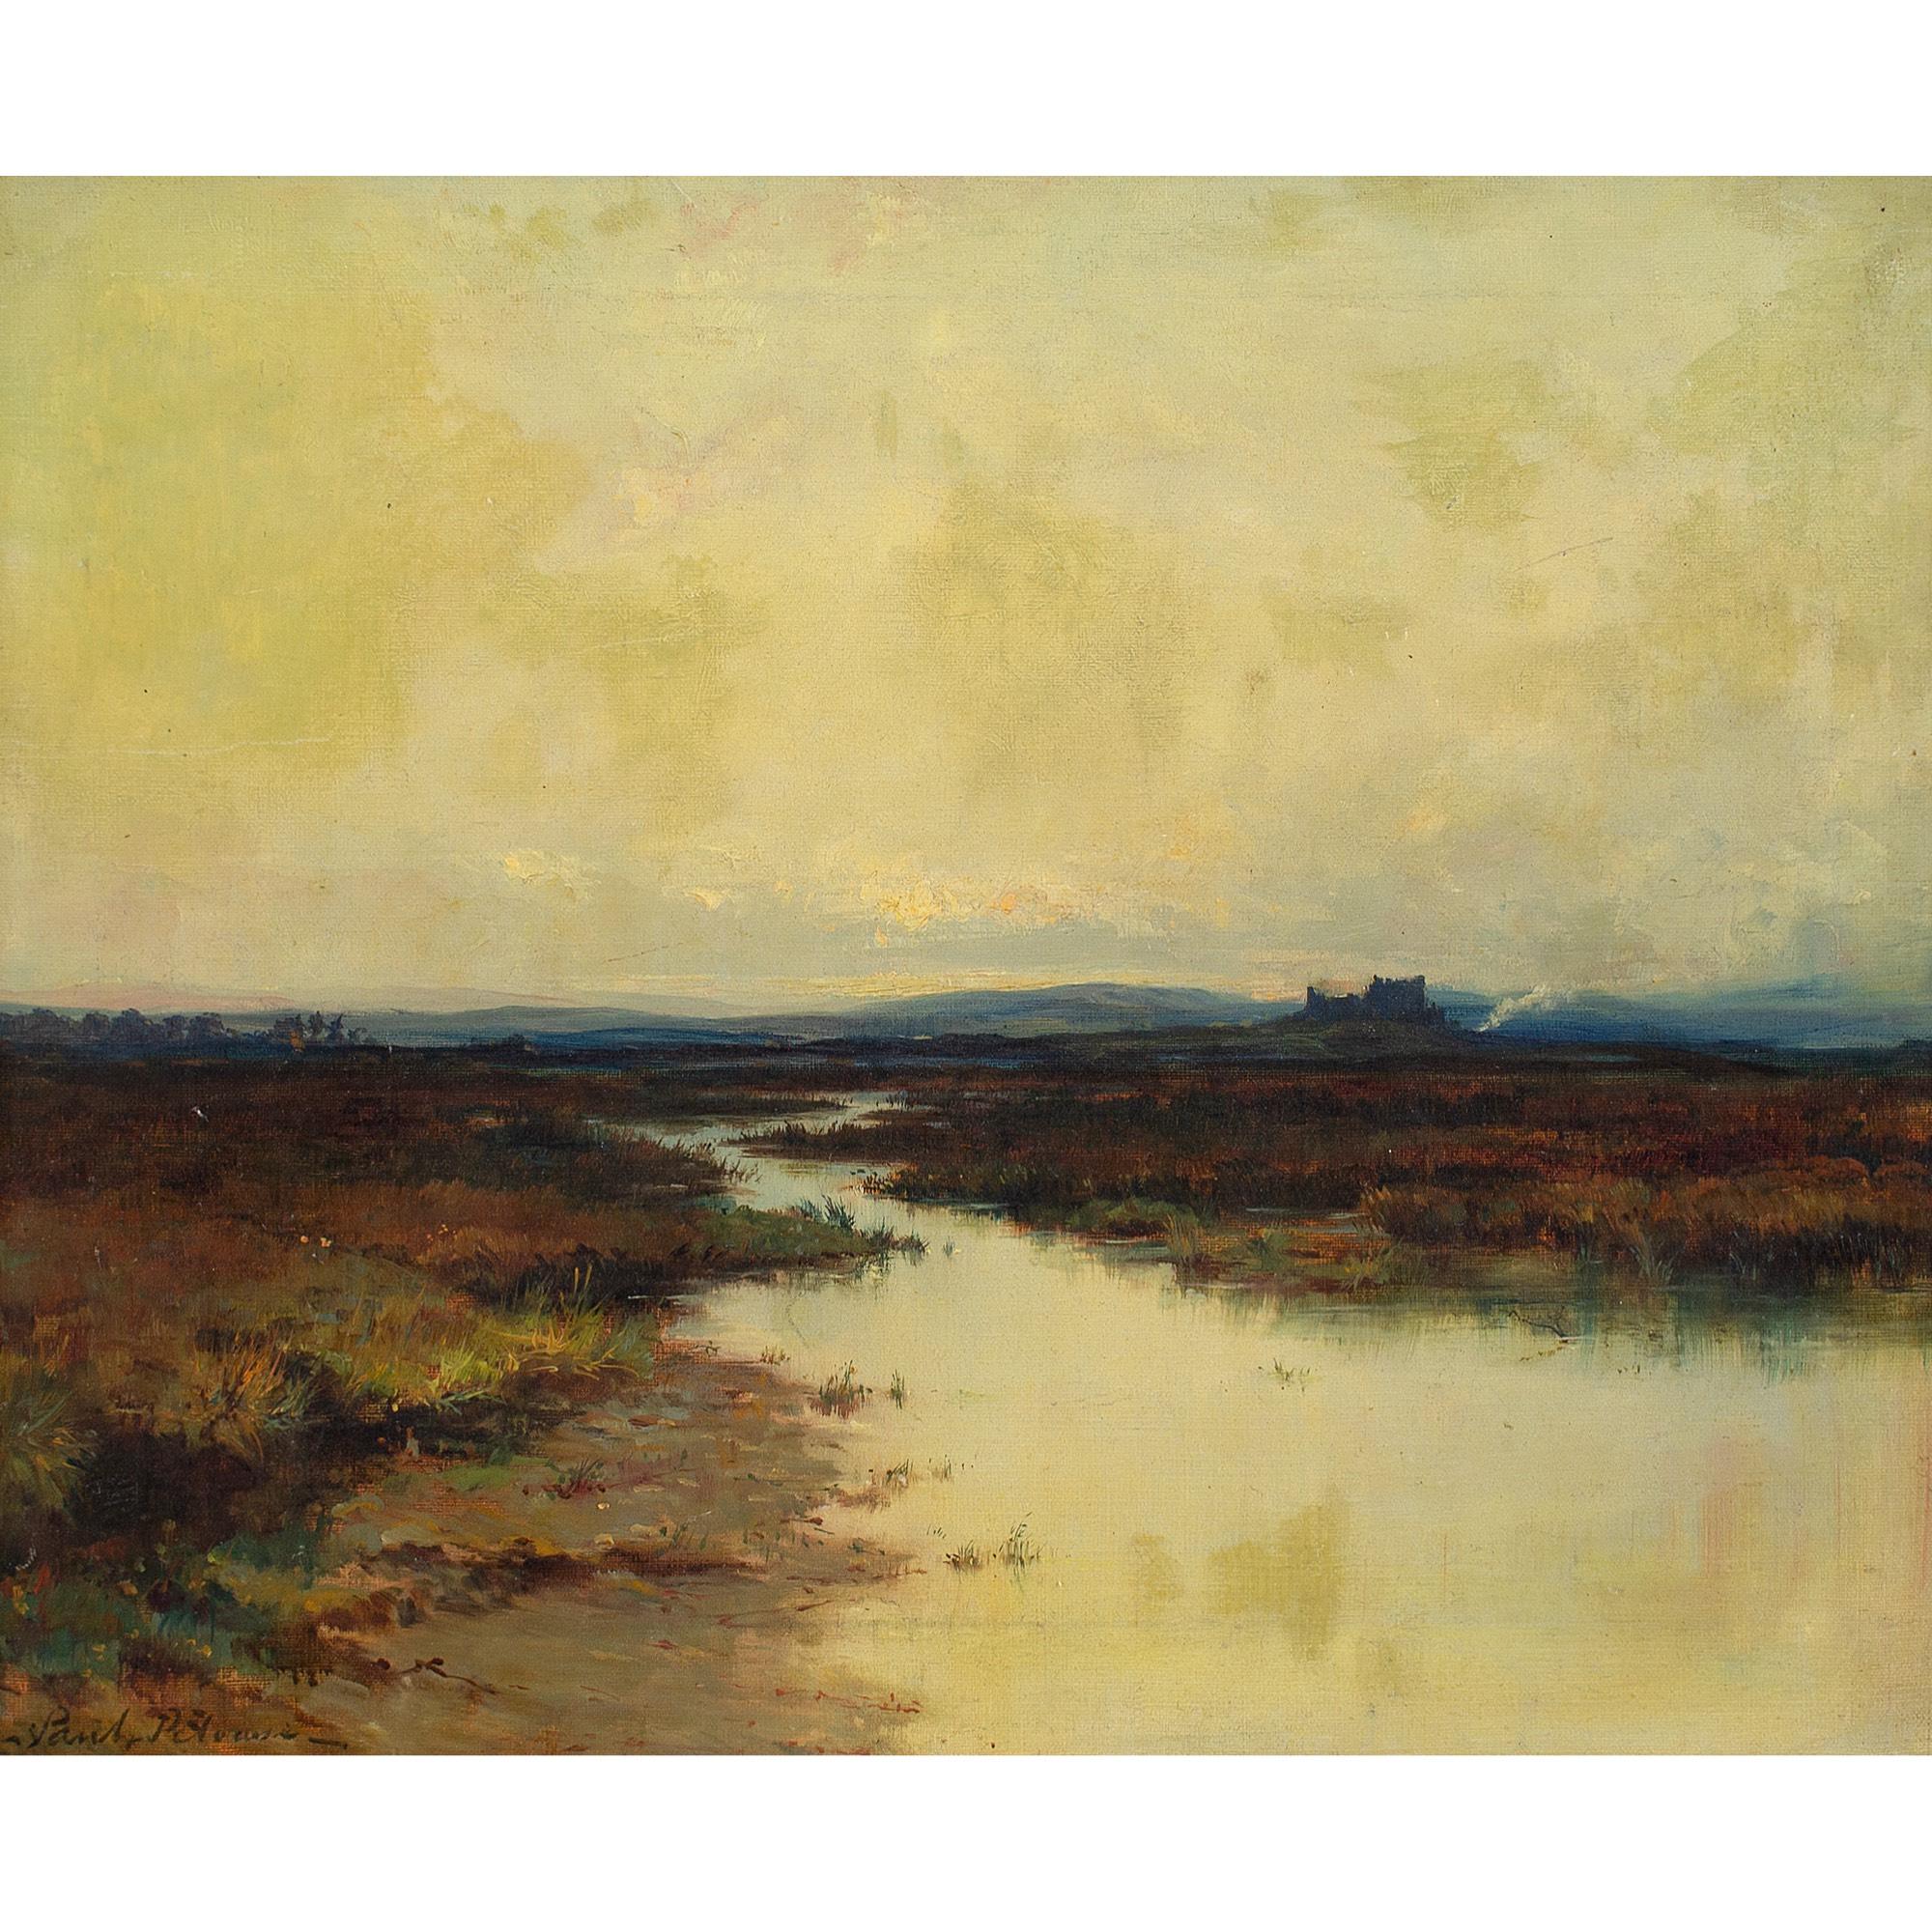 This early 20th-century Tonalist School oil on canvas depicts a lowland view with distant ruins.

Through a golden dreamlike haze, a winding river cuts across the lowlands towards a distant vanishing point. Three tiers of gentle hills are visible on